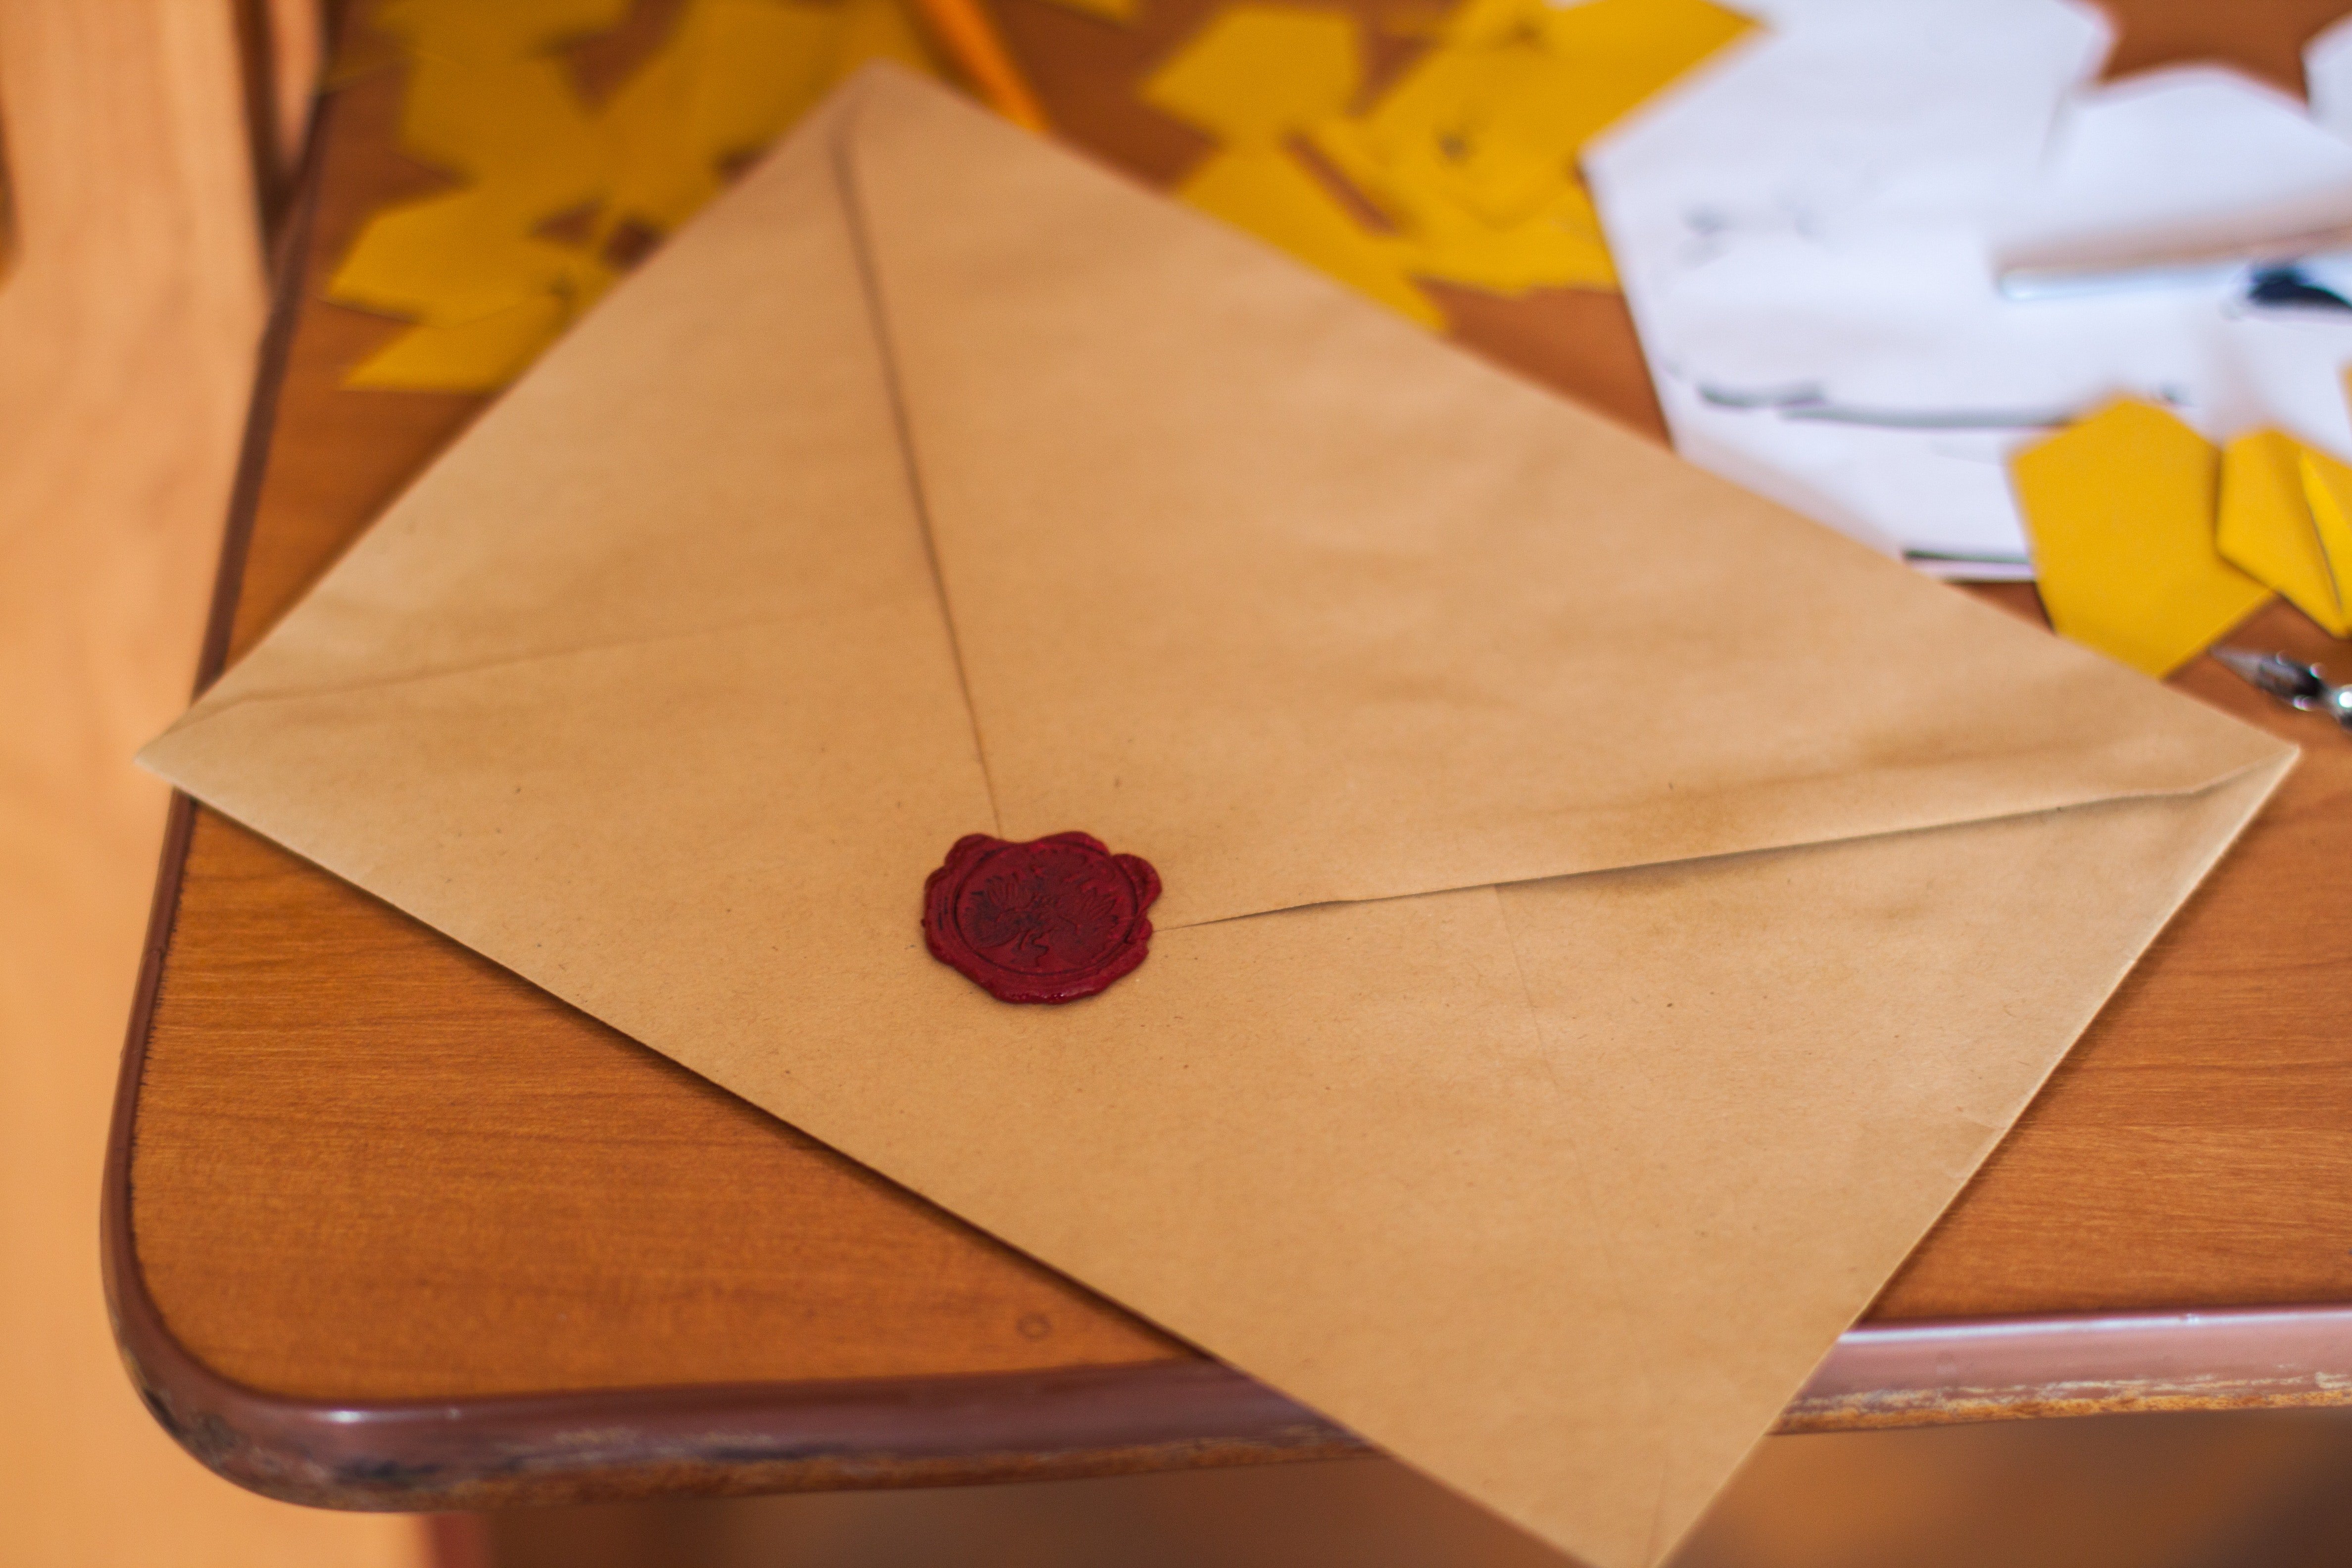 William sent Aiden letters but Edward hid them from Aiden  | Photo: Pexels